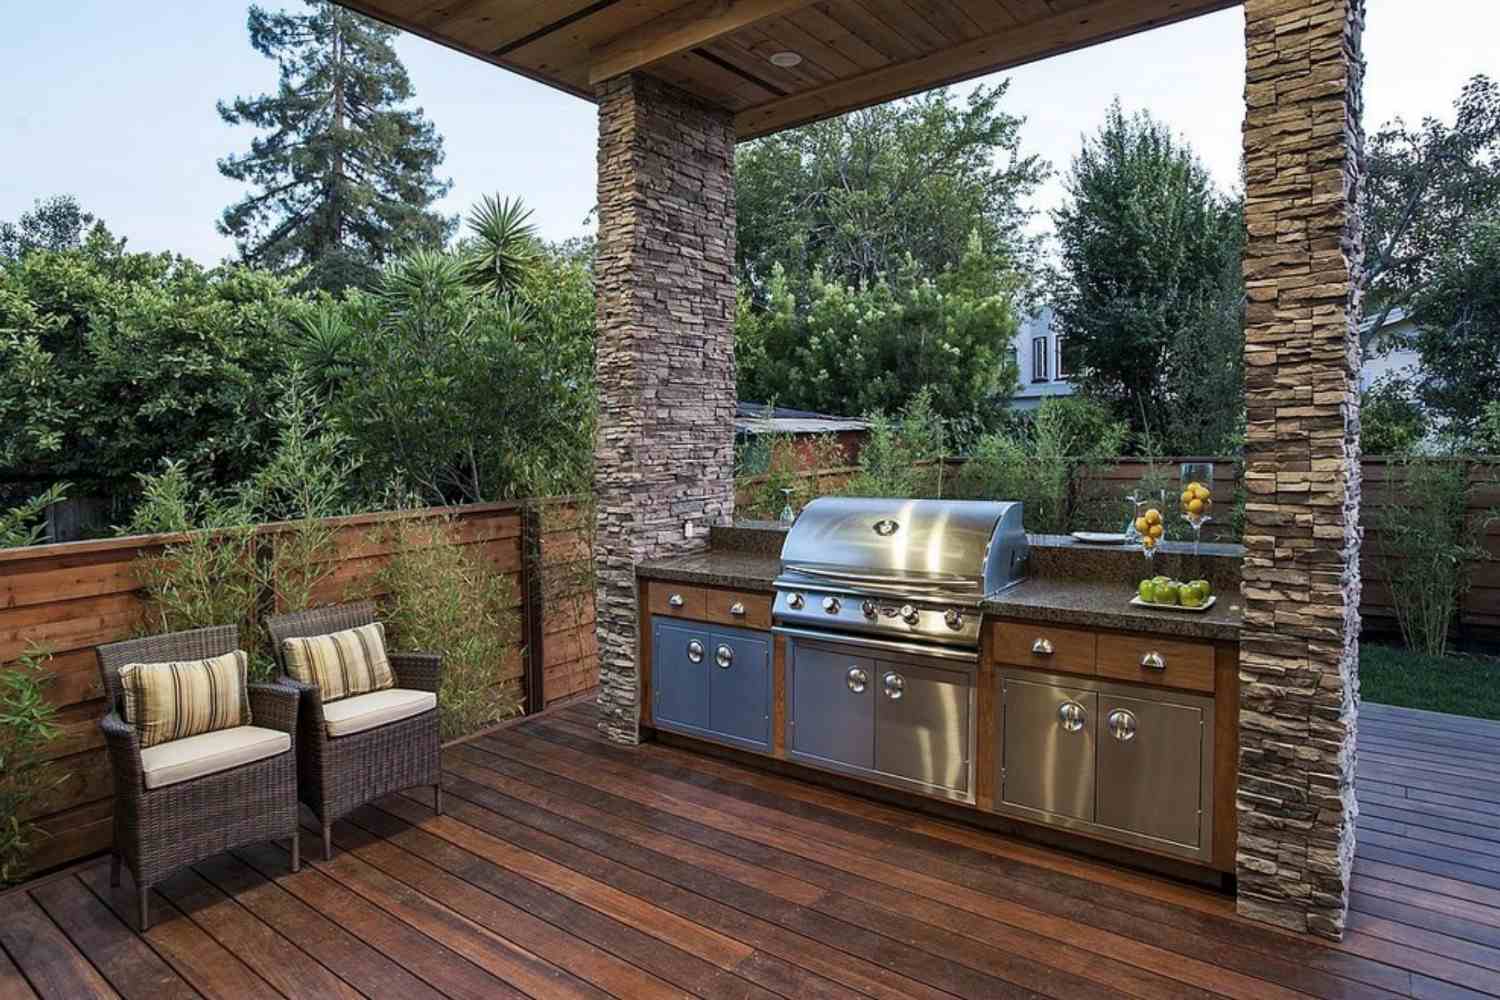 High-Tech Appliances – Improve Indoor and Outdoor Living